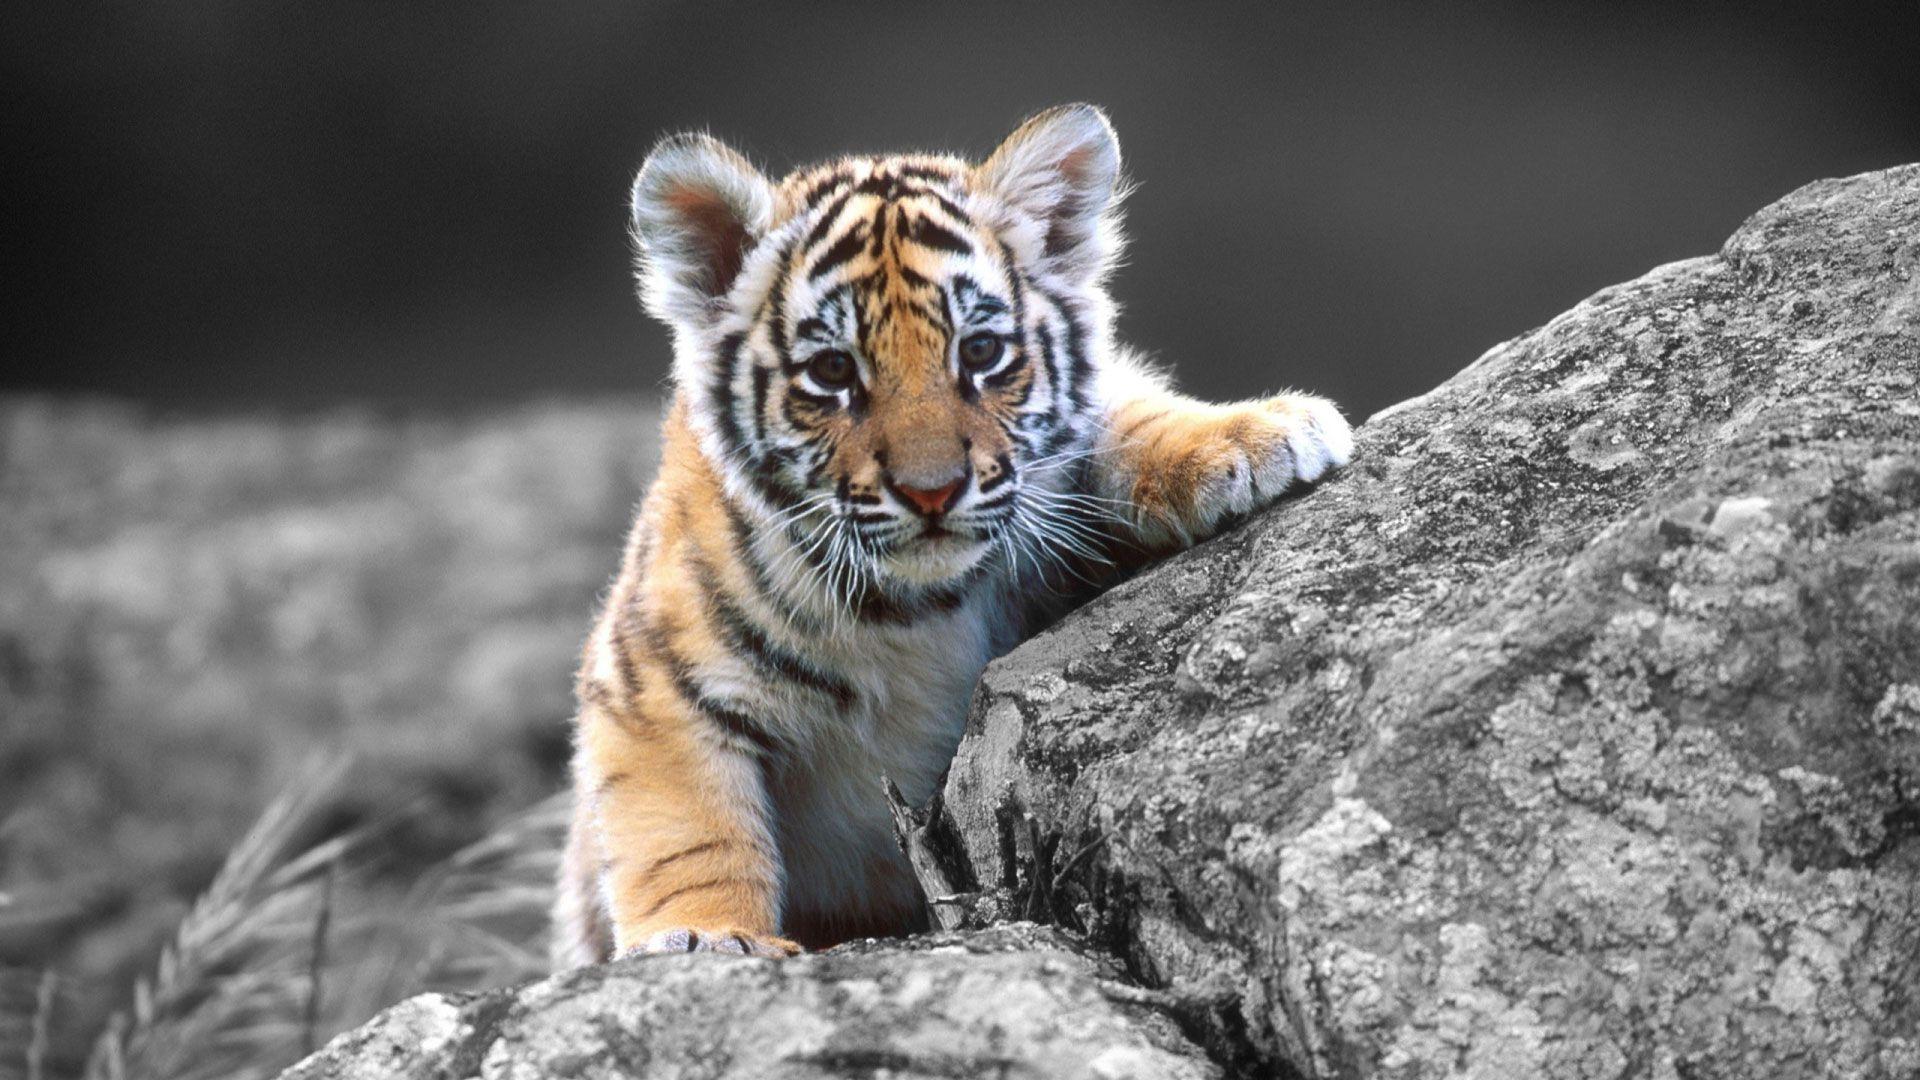 Tiger Picture. Cute animal picture and videos blog